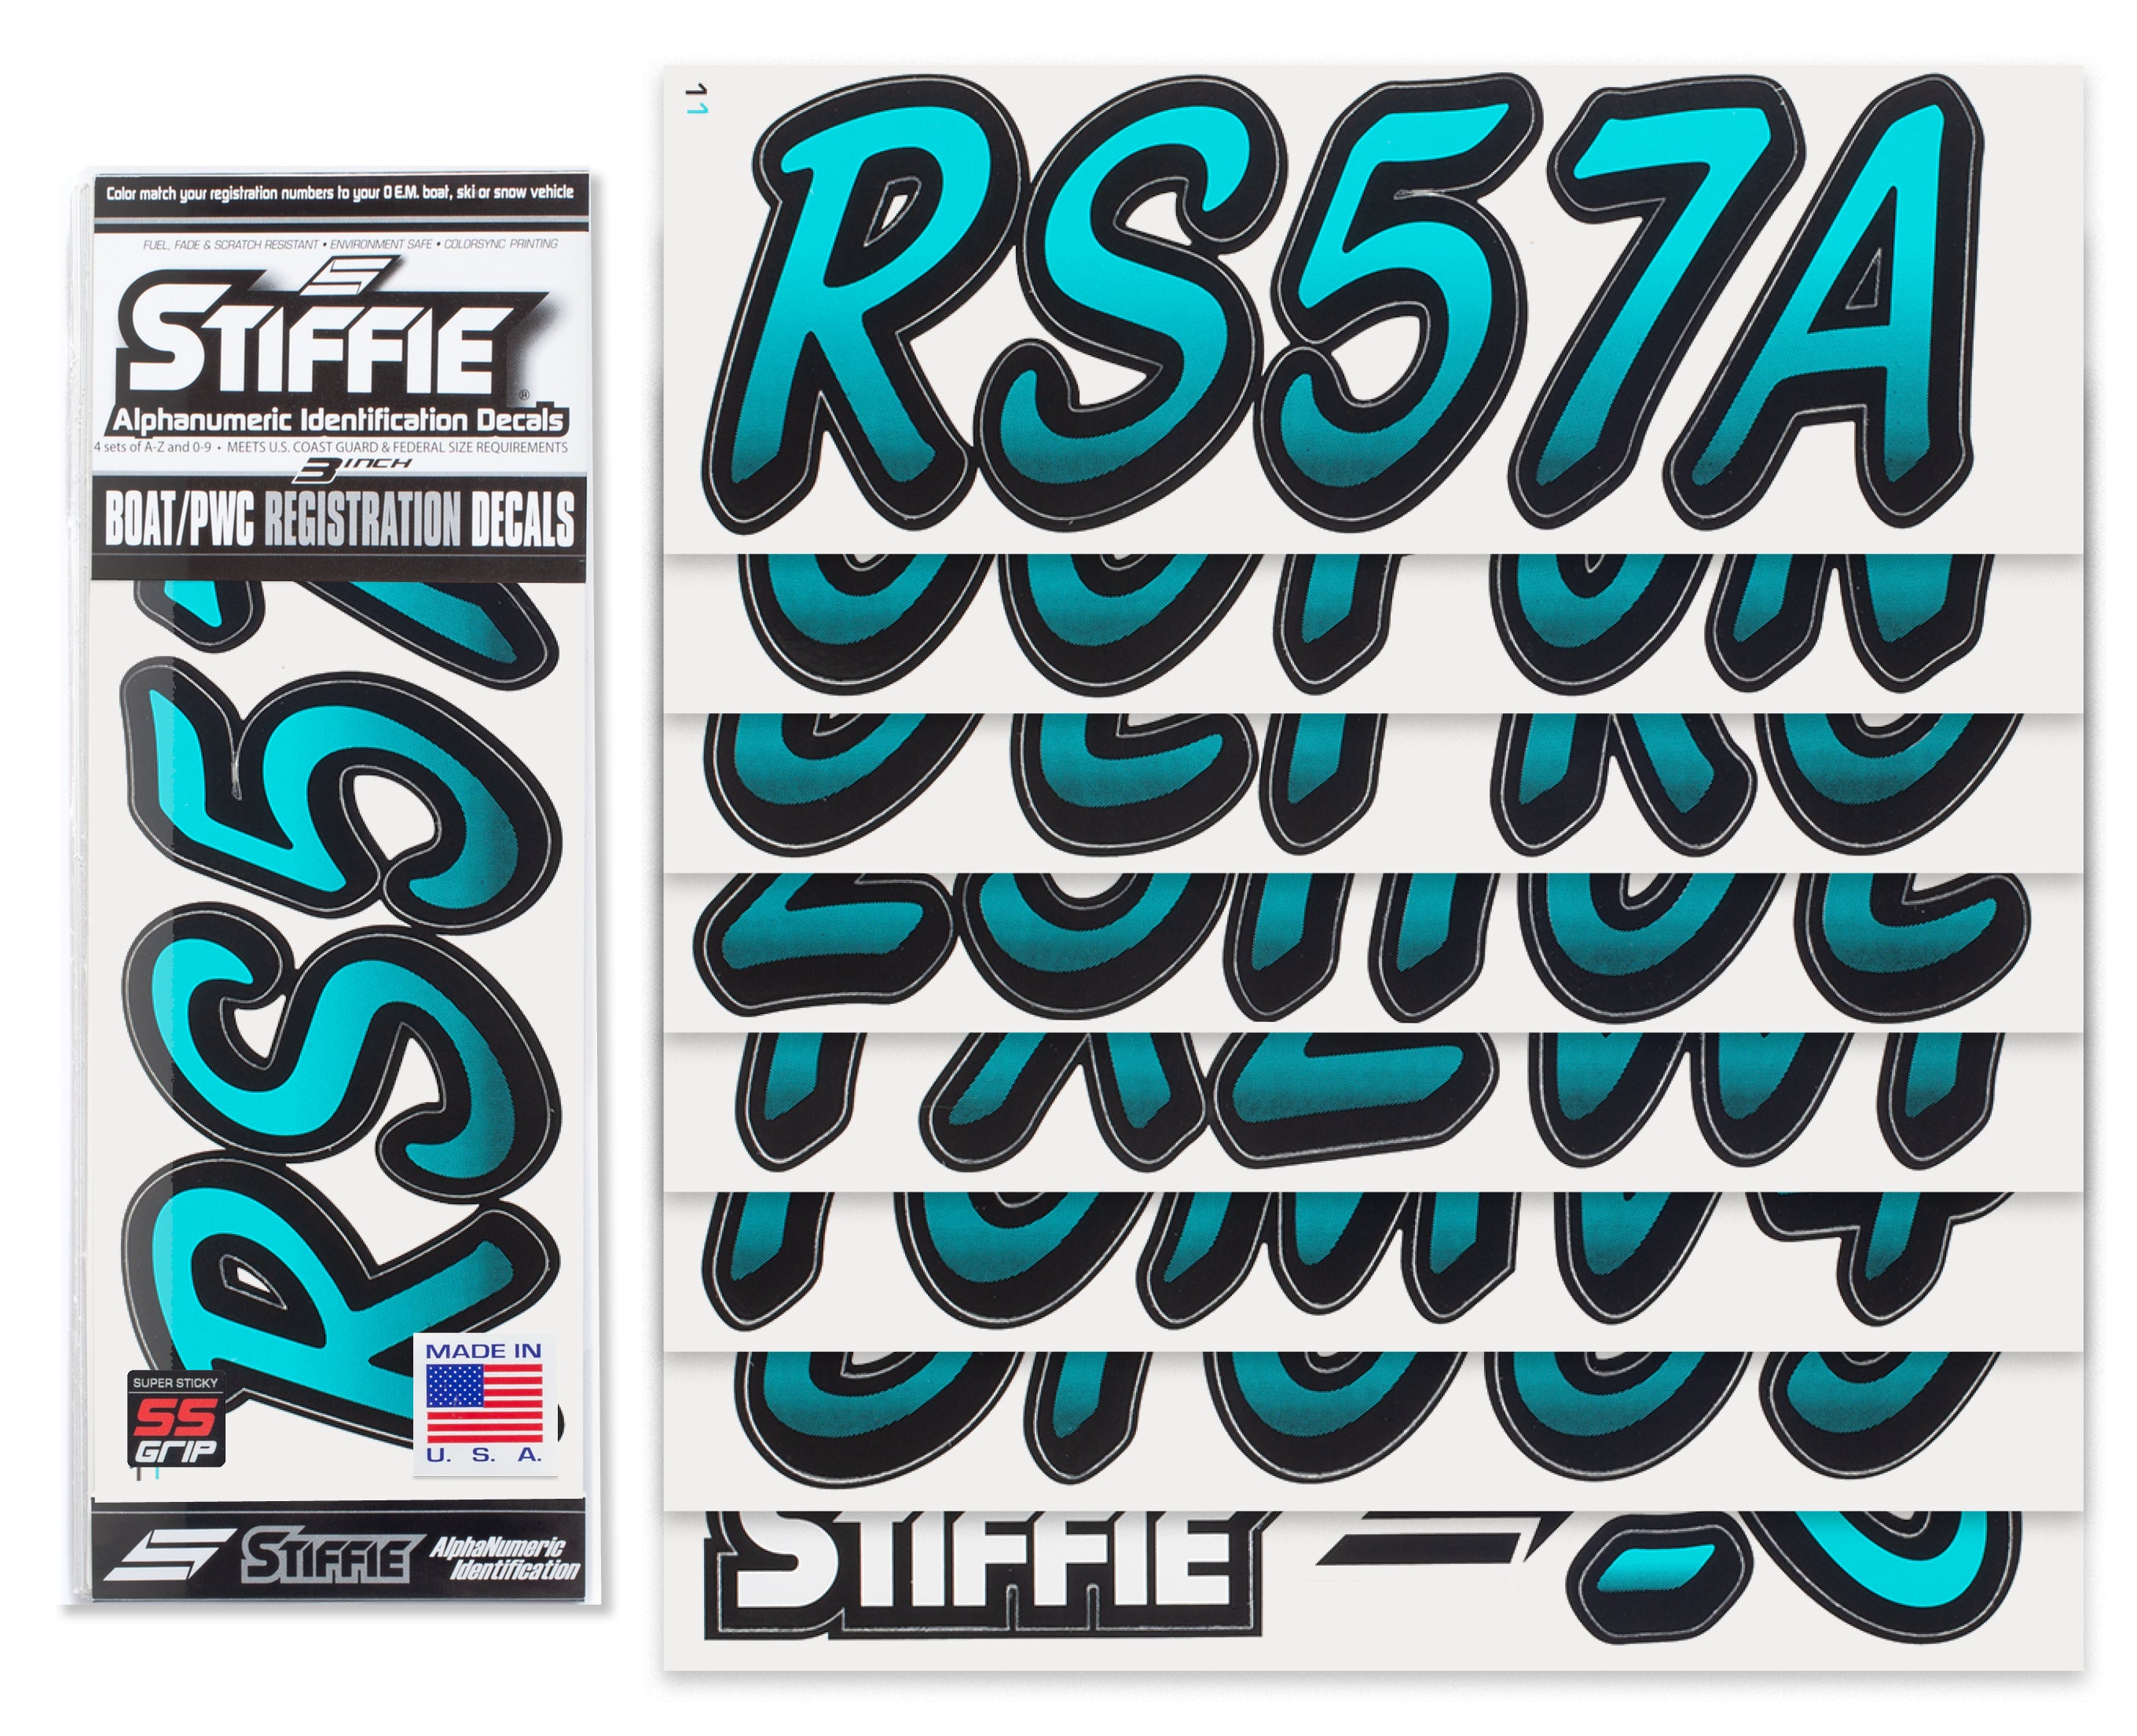 Stiffie Whipline Candy Blue/Black Super Sticky 3" Alpha Numeric Registration Identification Numbers Stickers Decals for Sea-Doo Spark, Inflatable Boats, Ribs, Hypalon/PVC, PWC and Boats